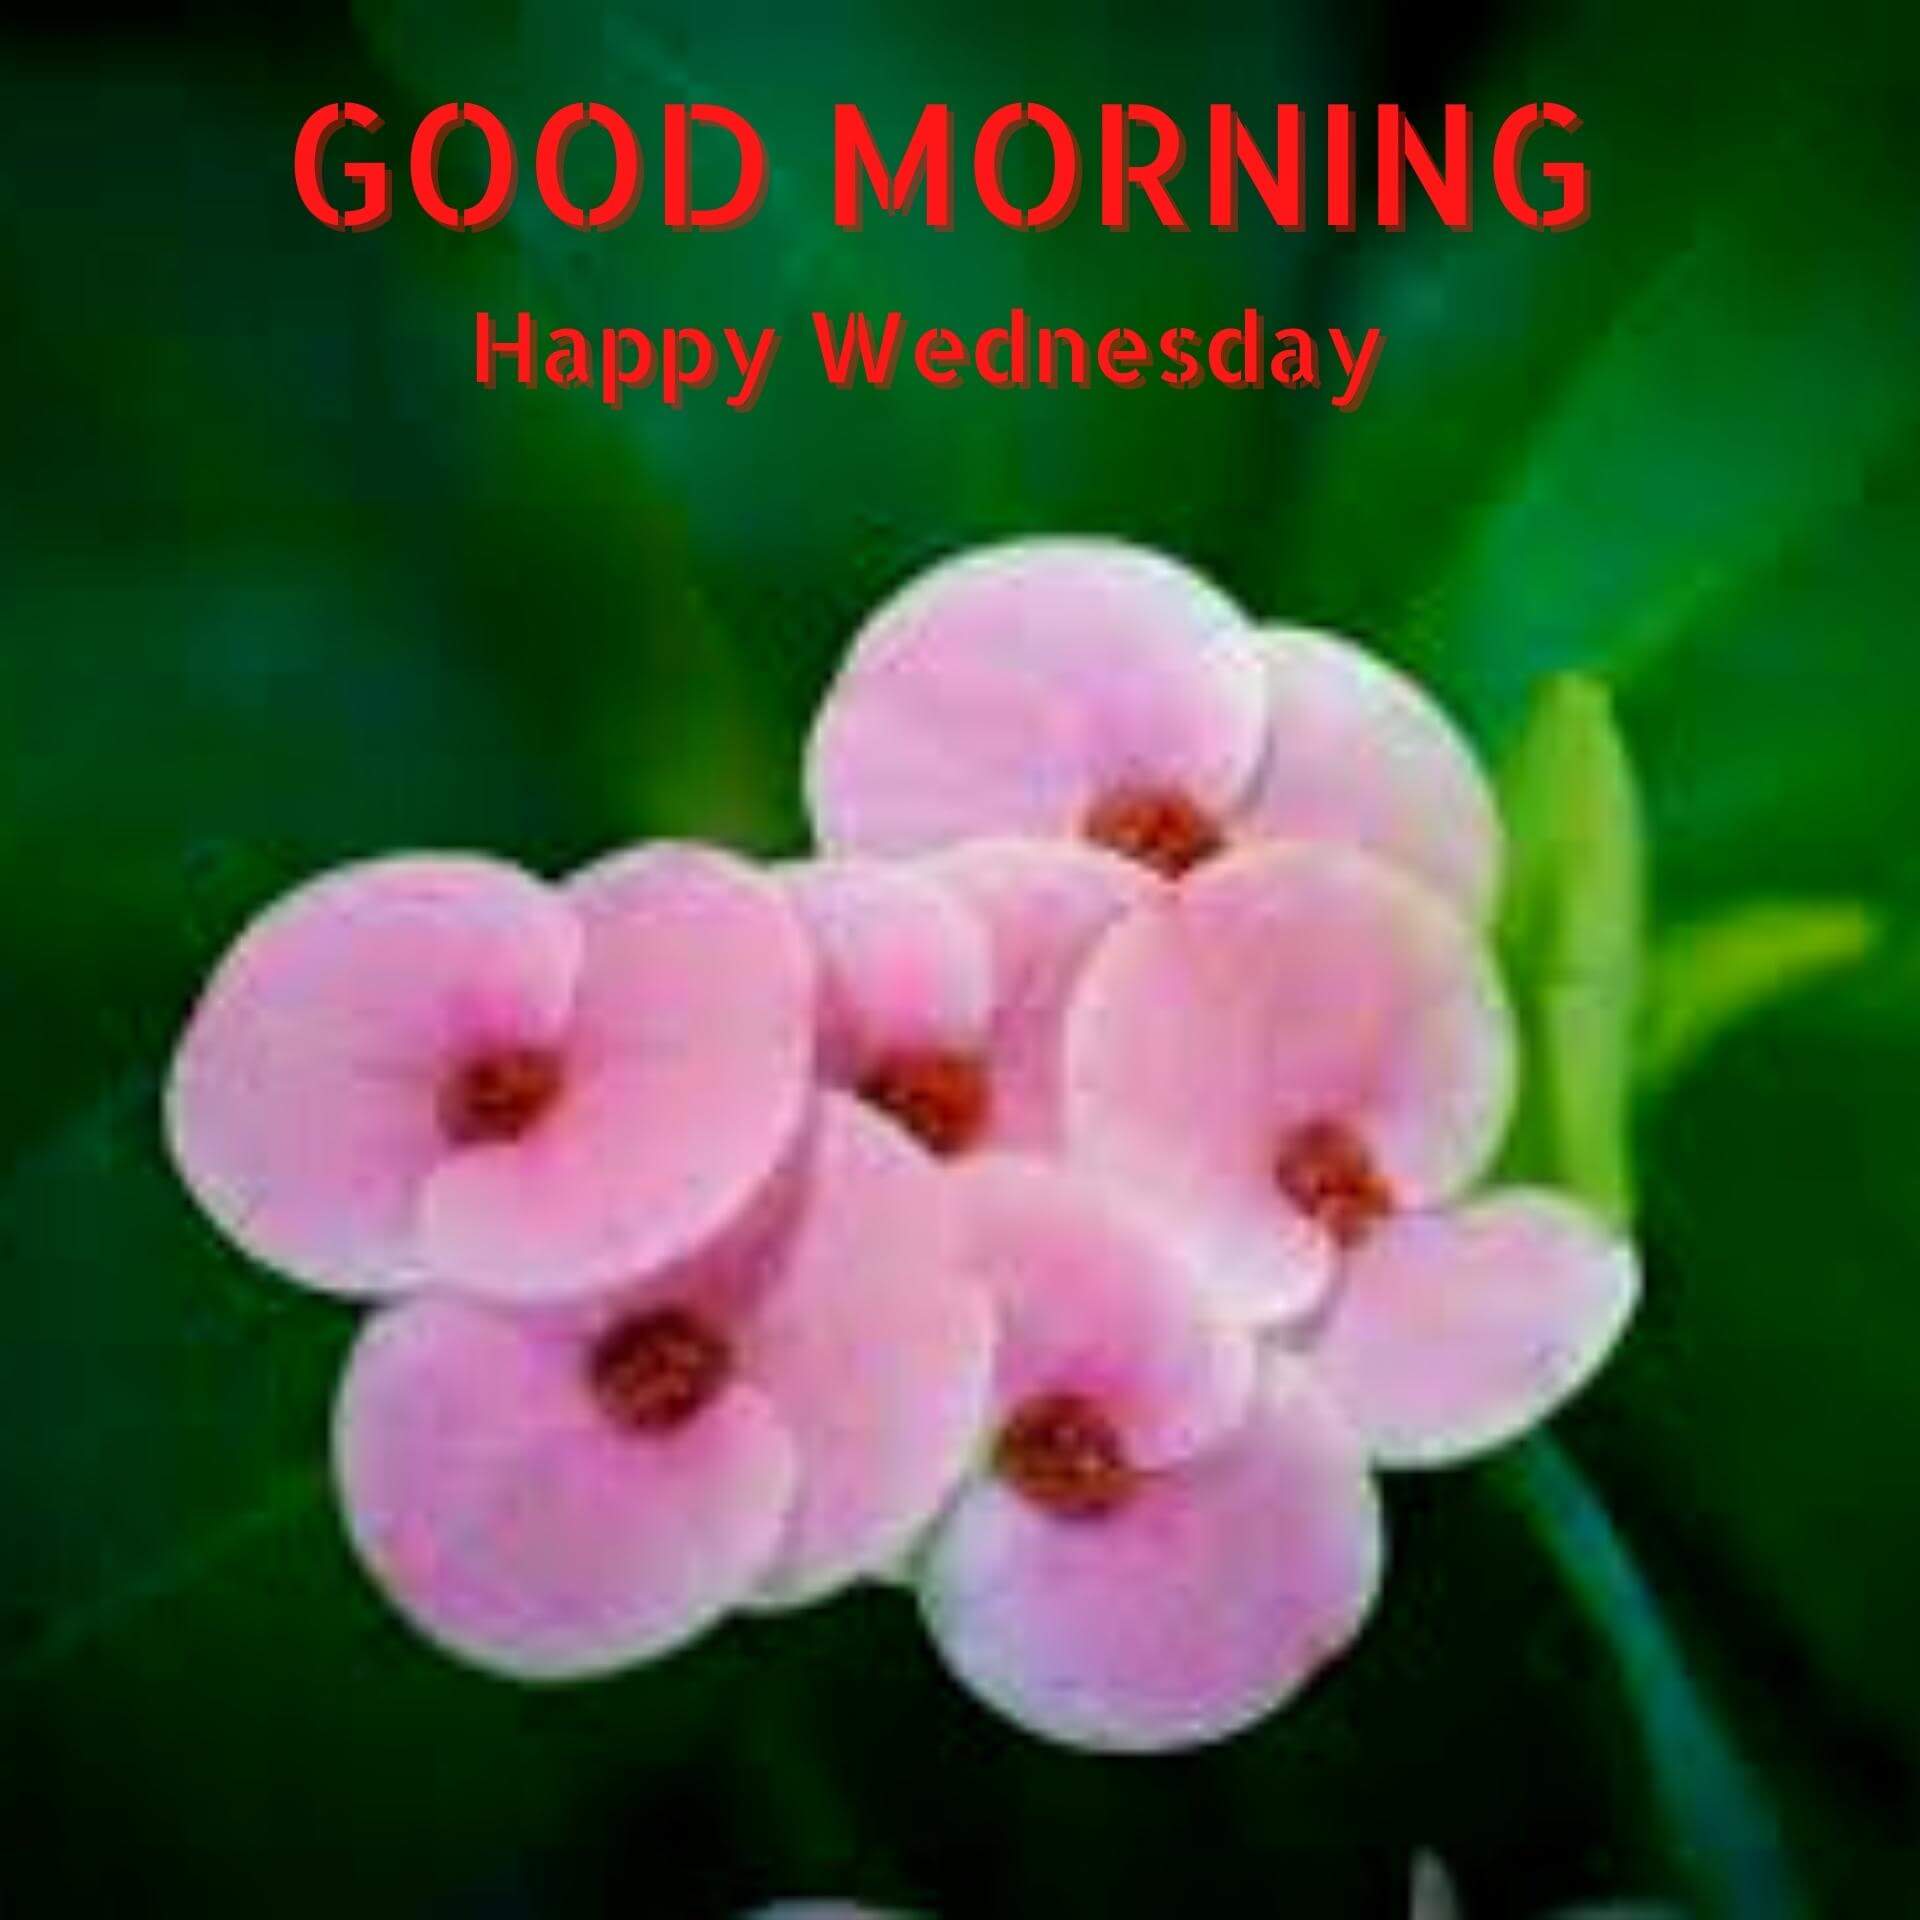 Wednesday good morning Pics Wallpaper Free Download